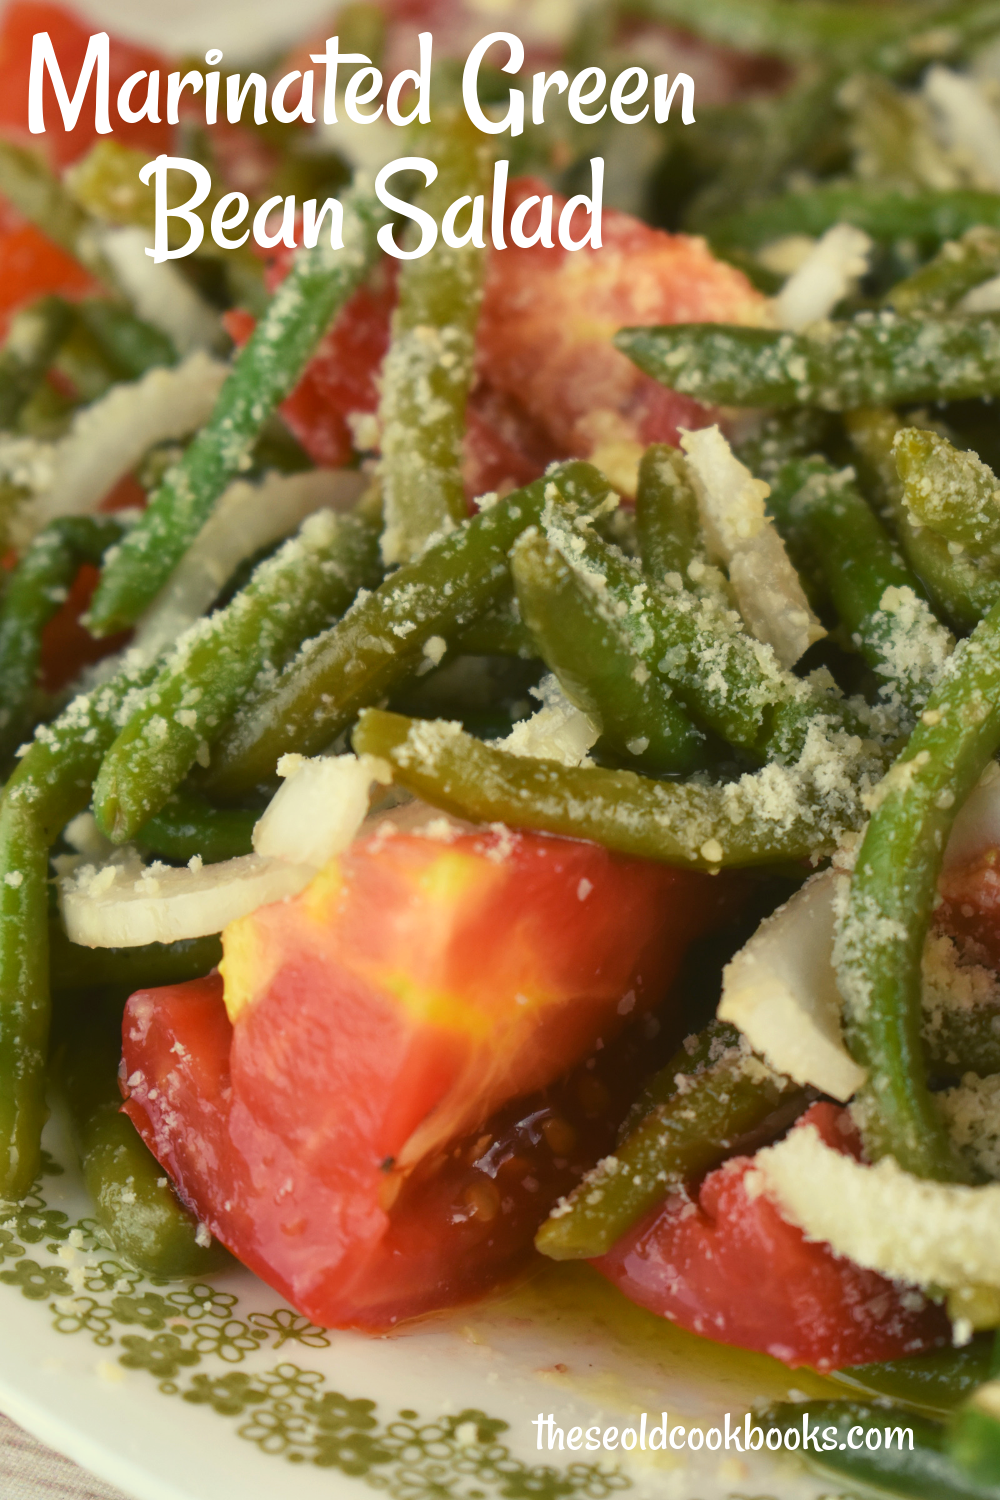 Italian Green Bean Salad is a cold salad featuring thin style green beans, tomatoes and onions tossed in a tasty vinaigrette. A healthy sprinkling of Parmesan cheese takes this salad from good to great. Serve along side grilled chicken for the perfect meal.